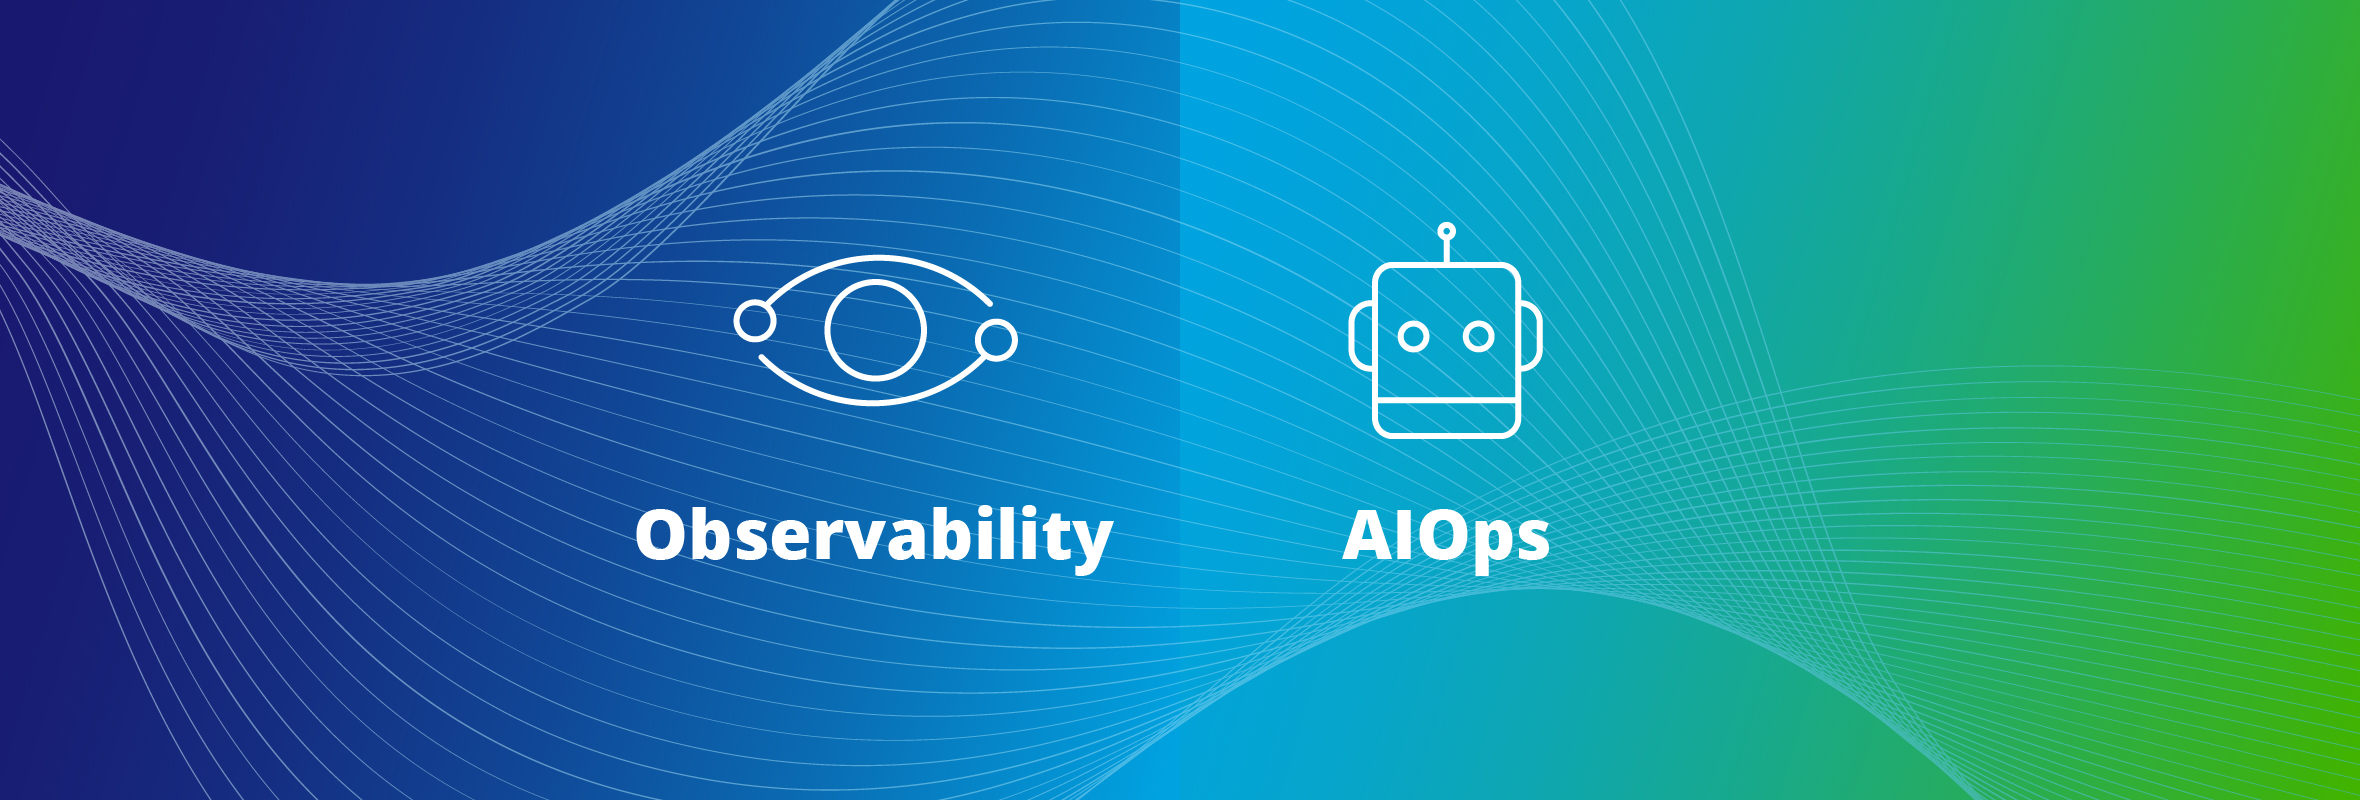 Which is More Important: Observability or AIOps?